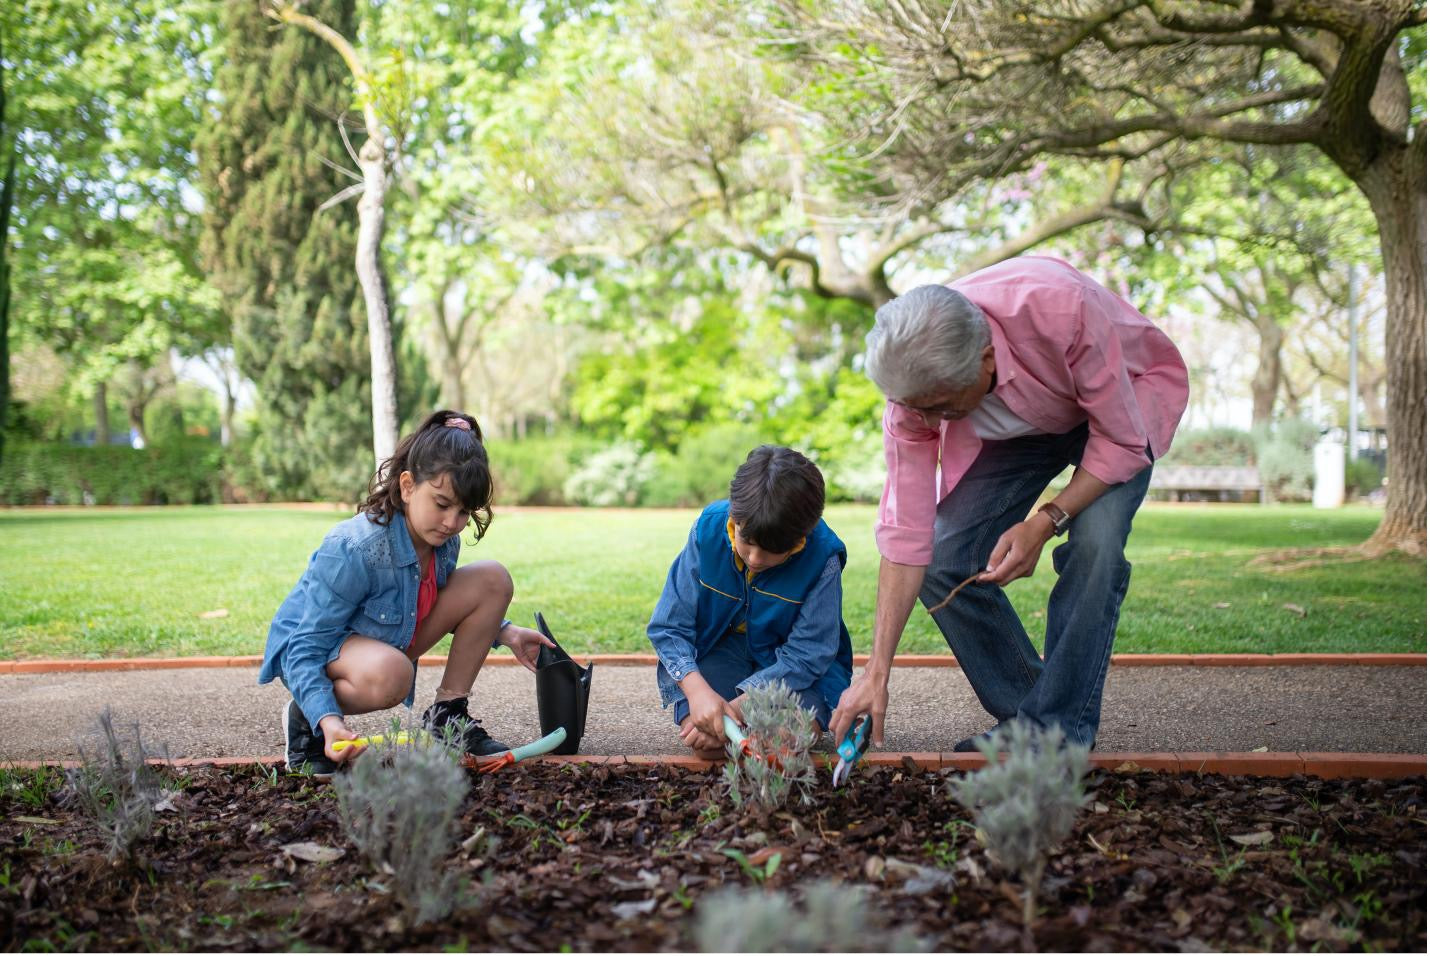 How can grandparents get children interested in gardening?